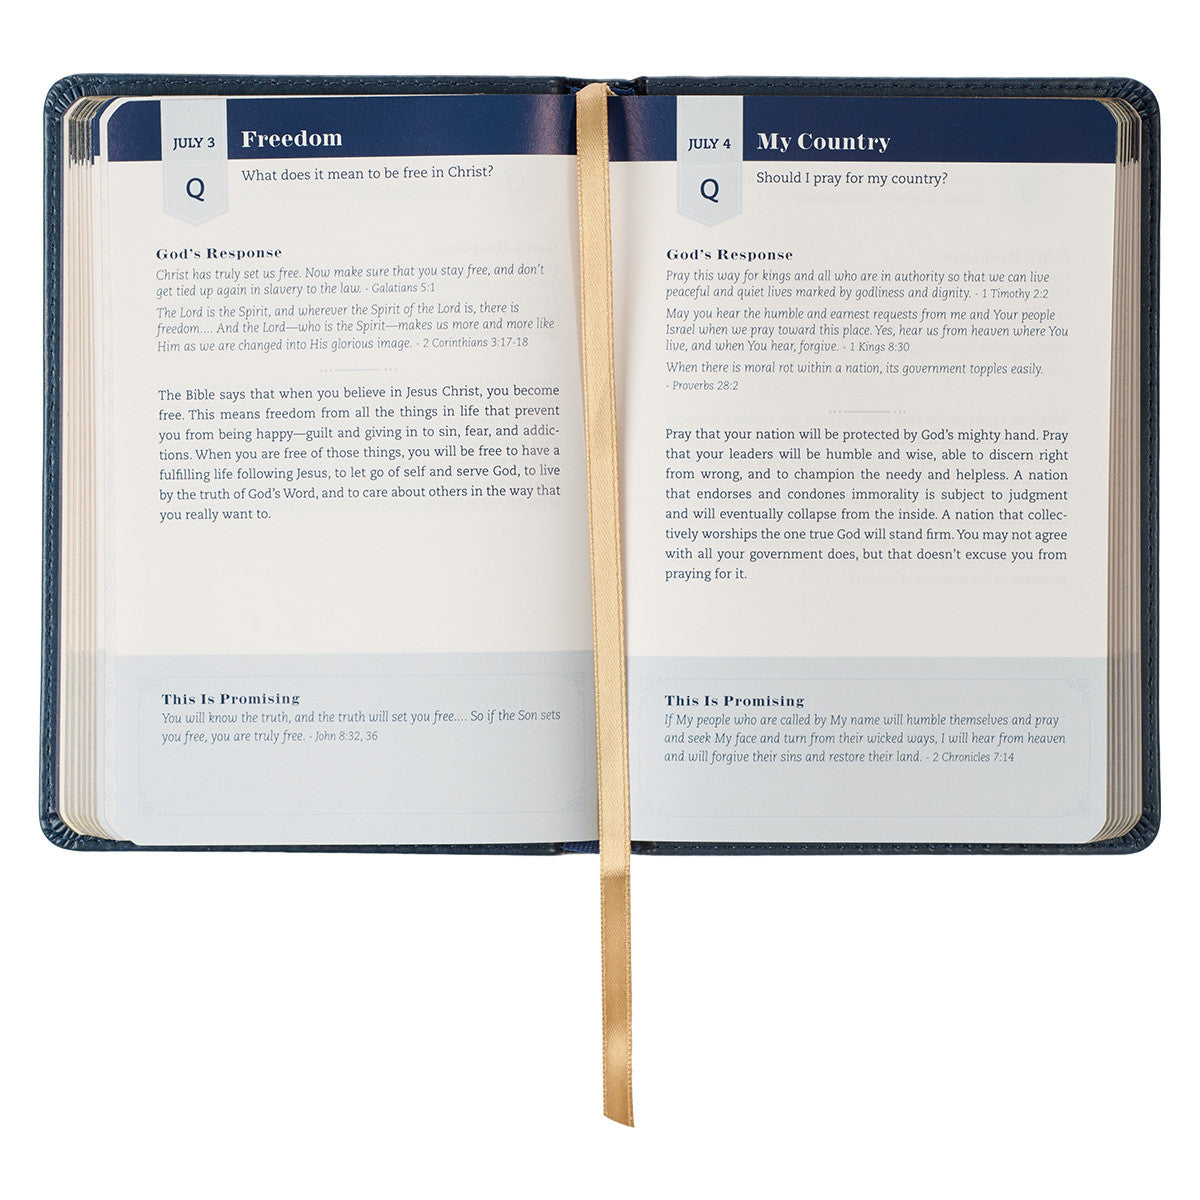 One Minute with God for Students Blue Faux Leather Devotional - The Christian Gift Company